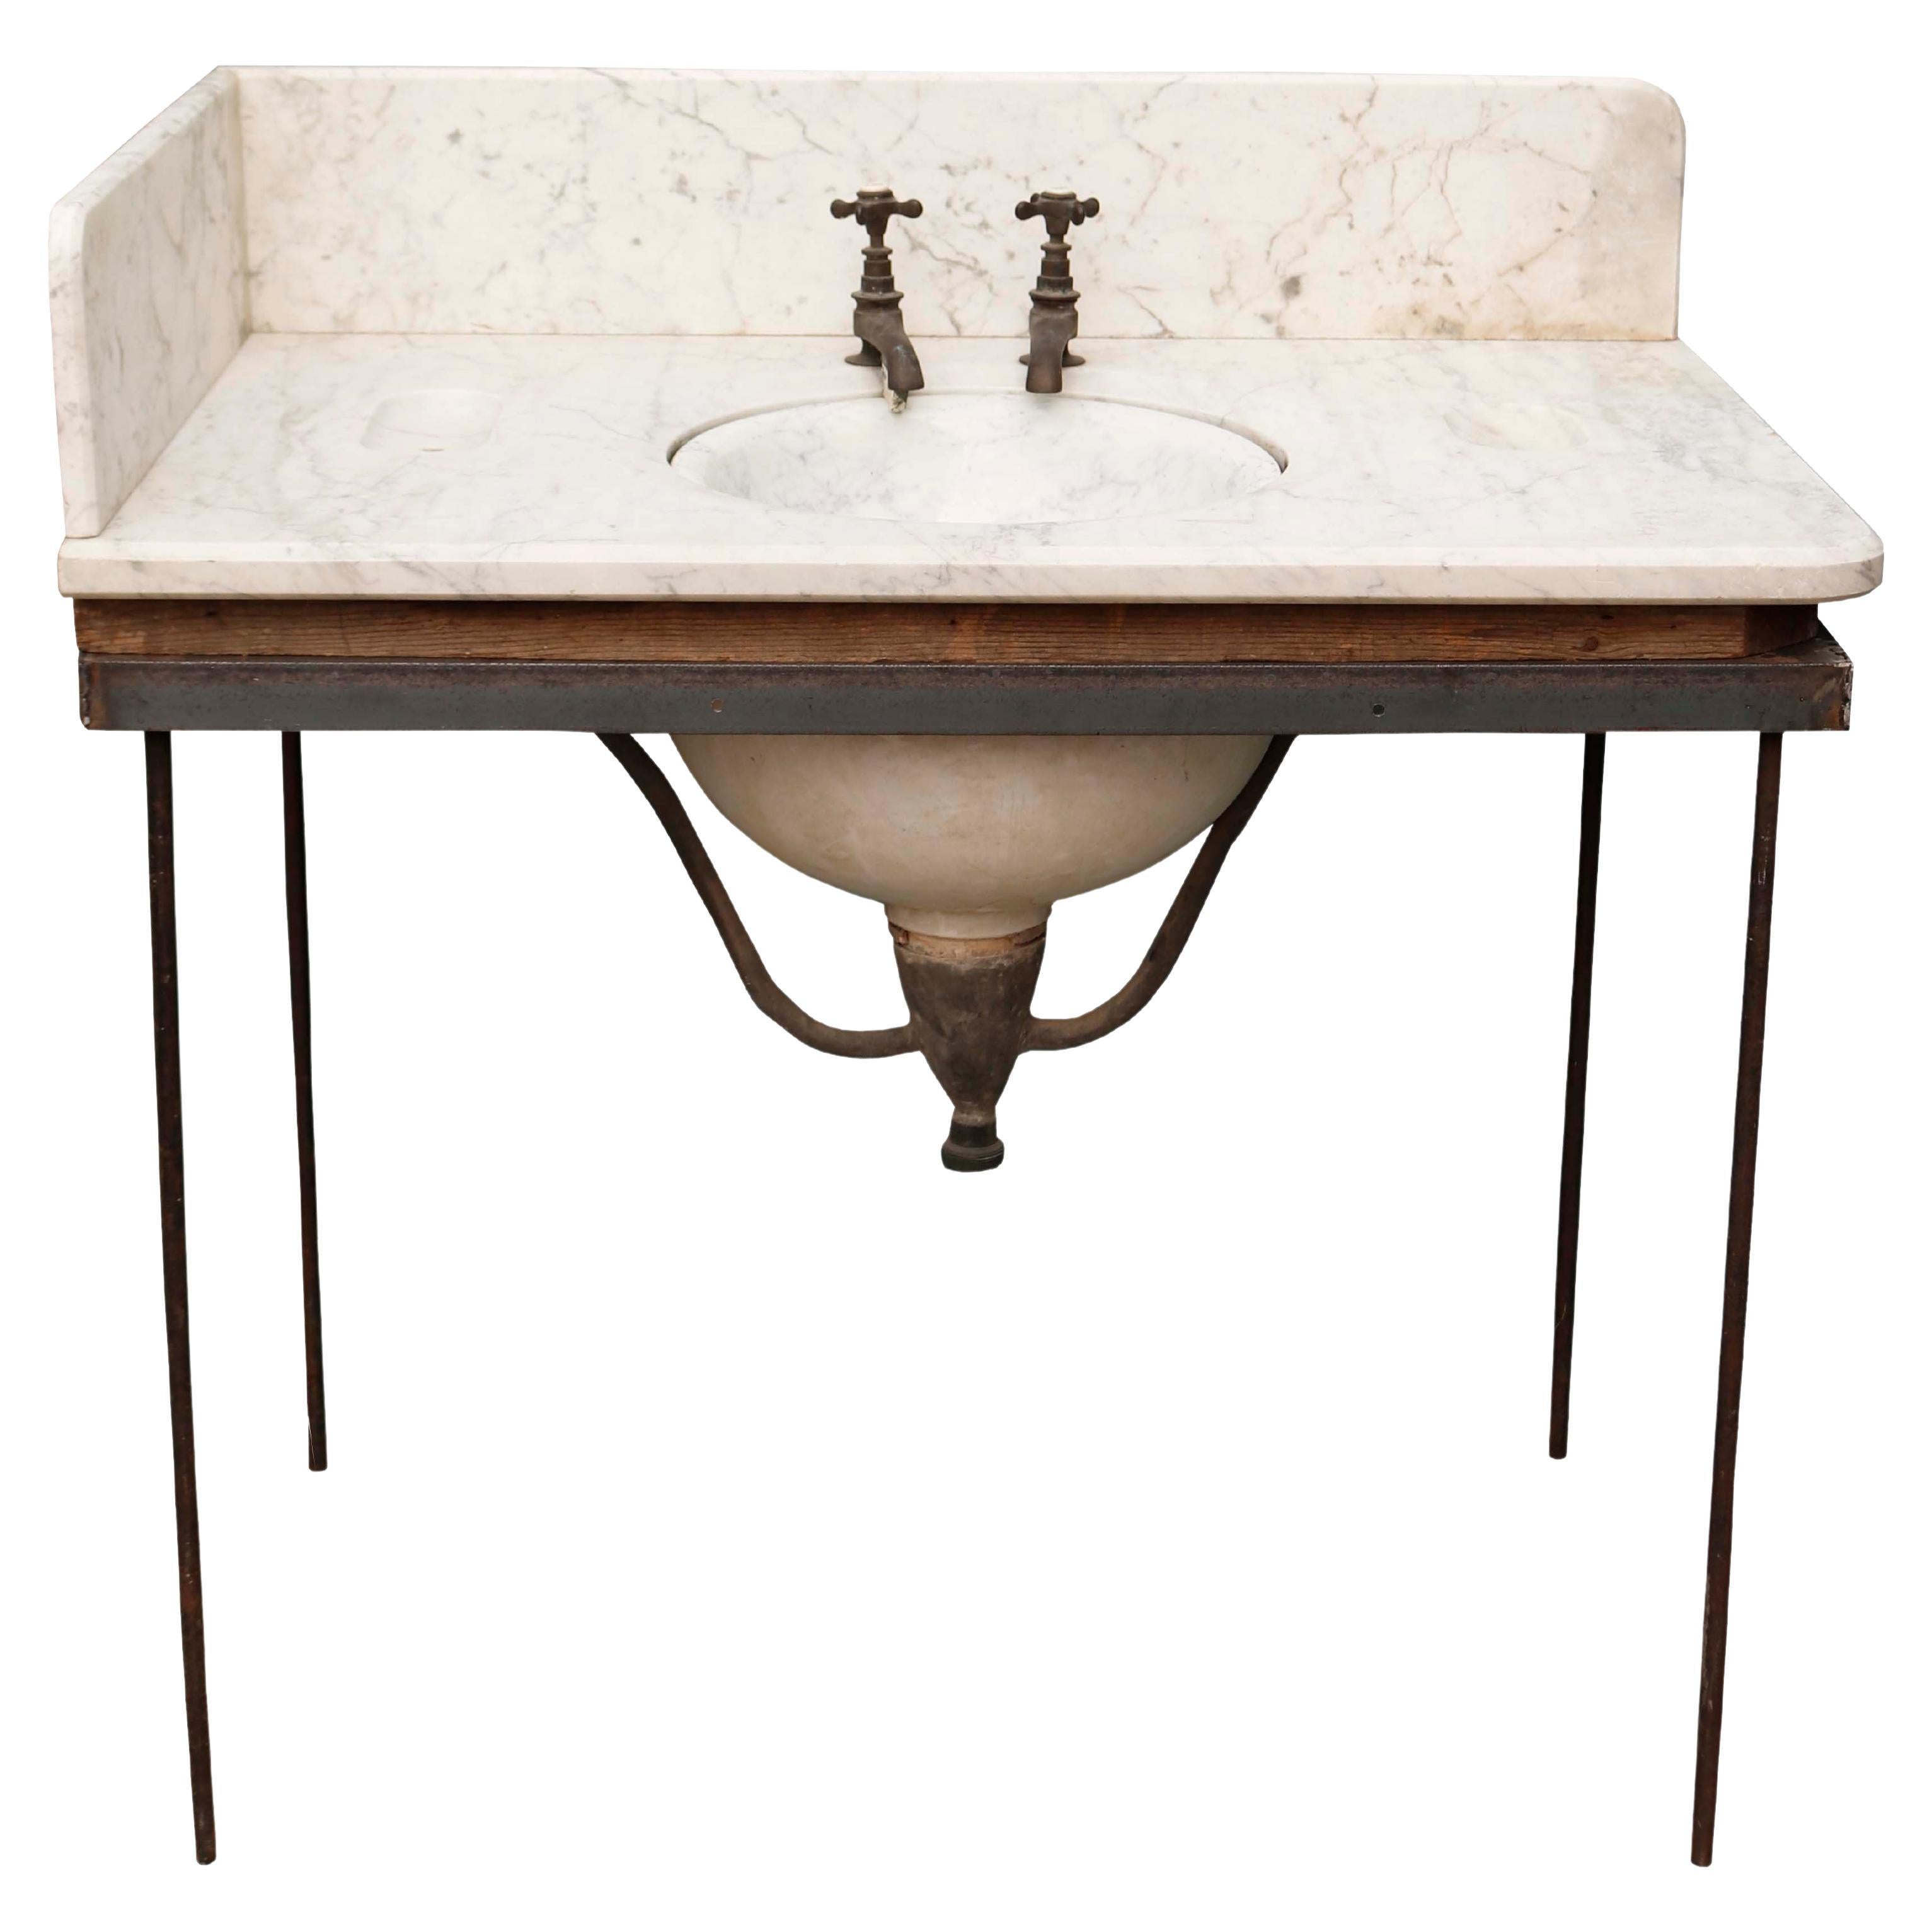 George Jennings Marble Liftup Sink For Sale